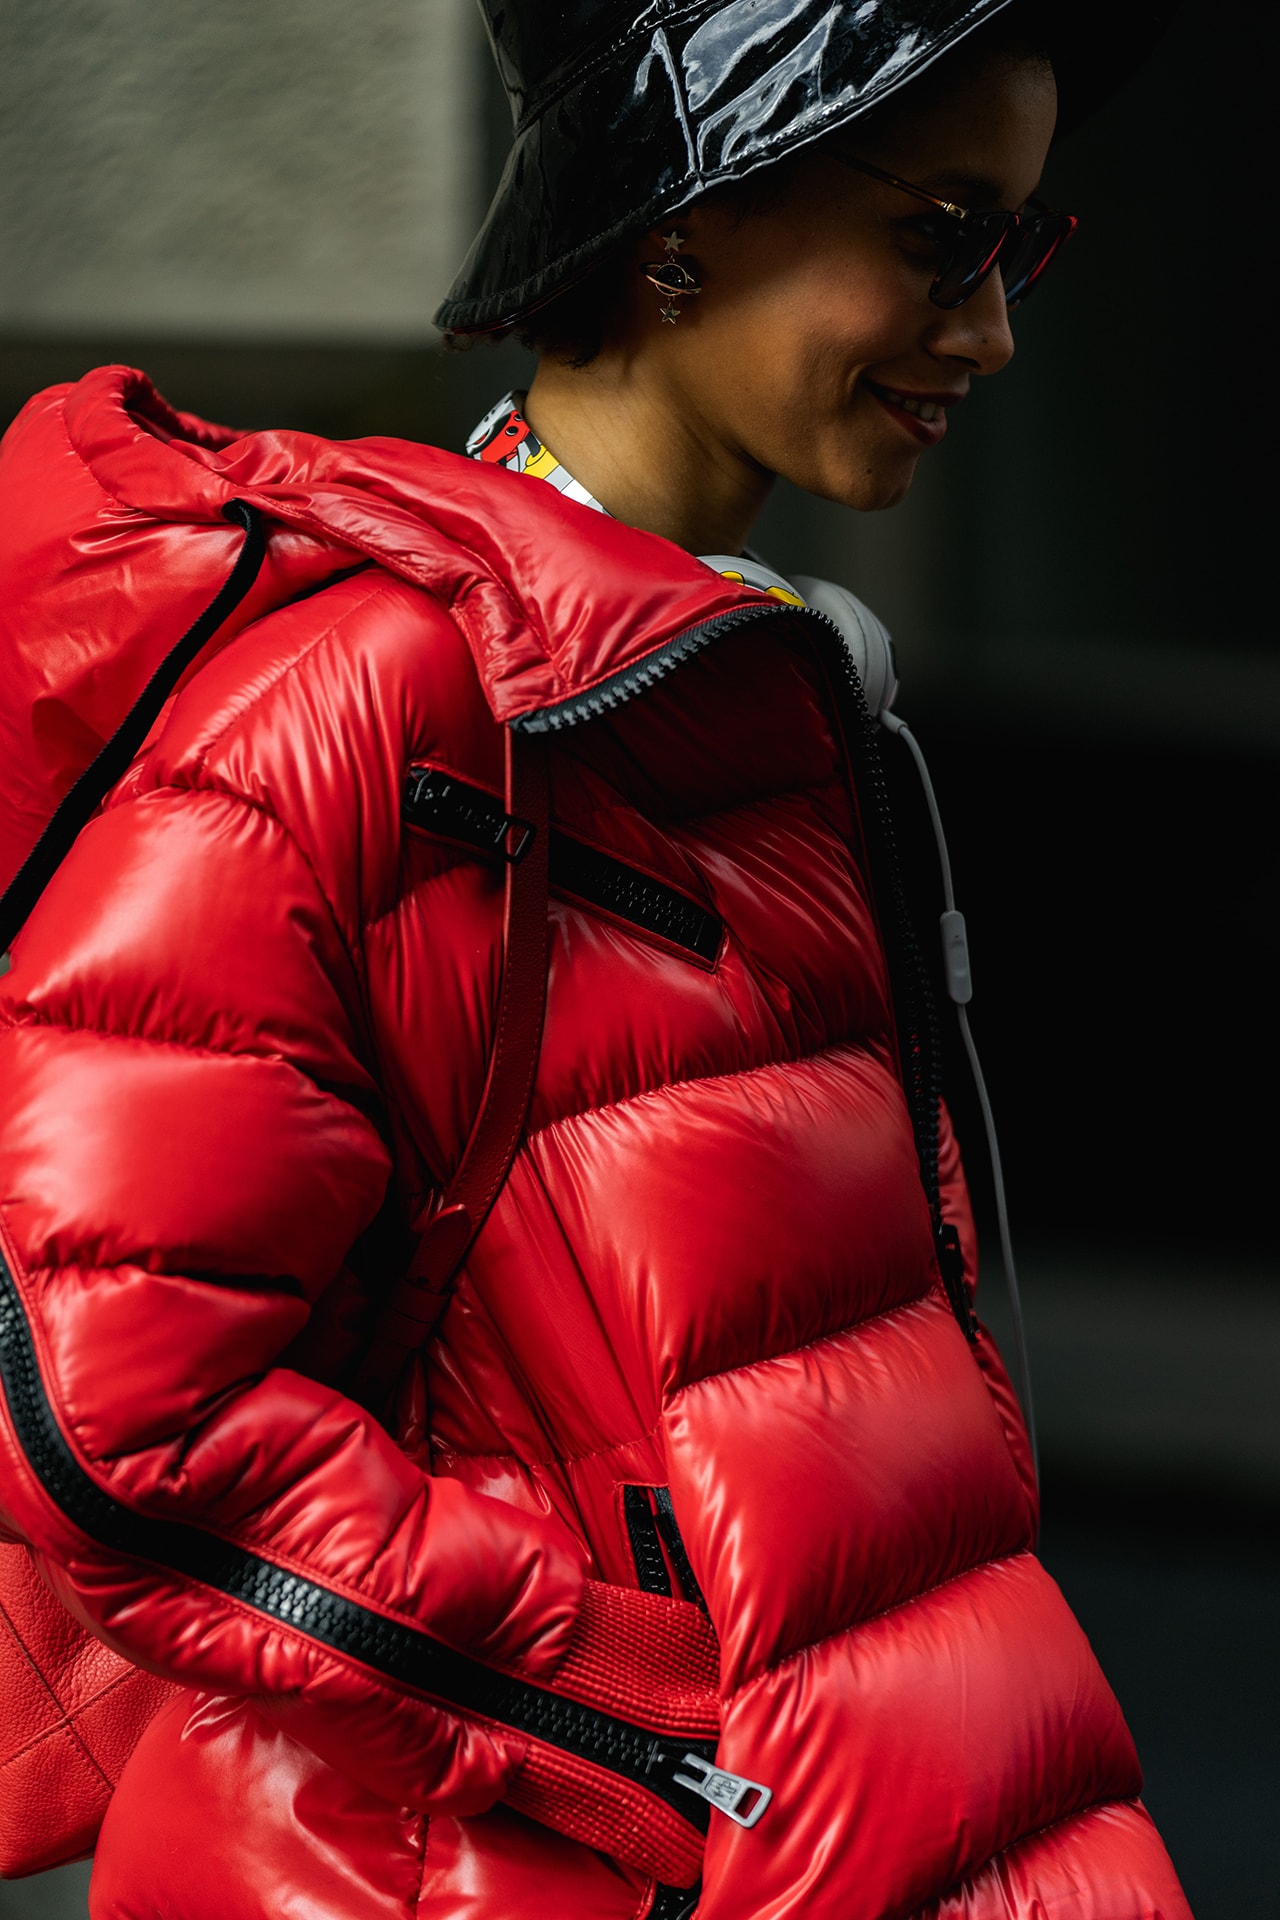 new york fashion week nyfw fall winter 2019 fw19 street style blogger influencer red puffer jacket